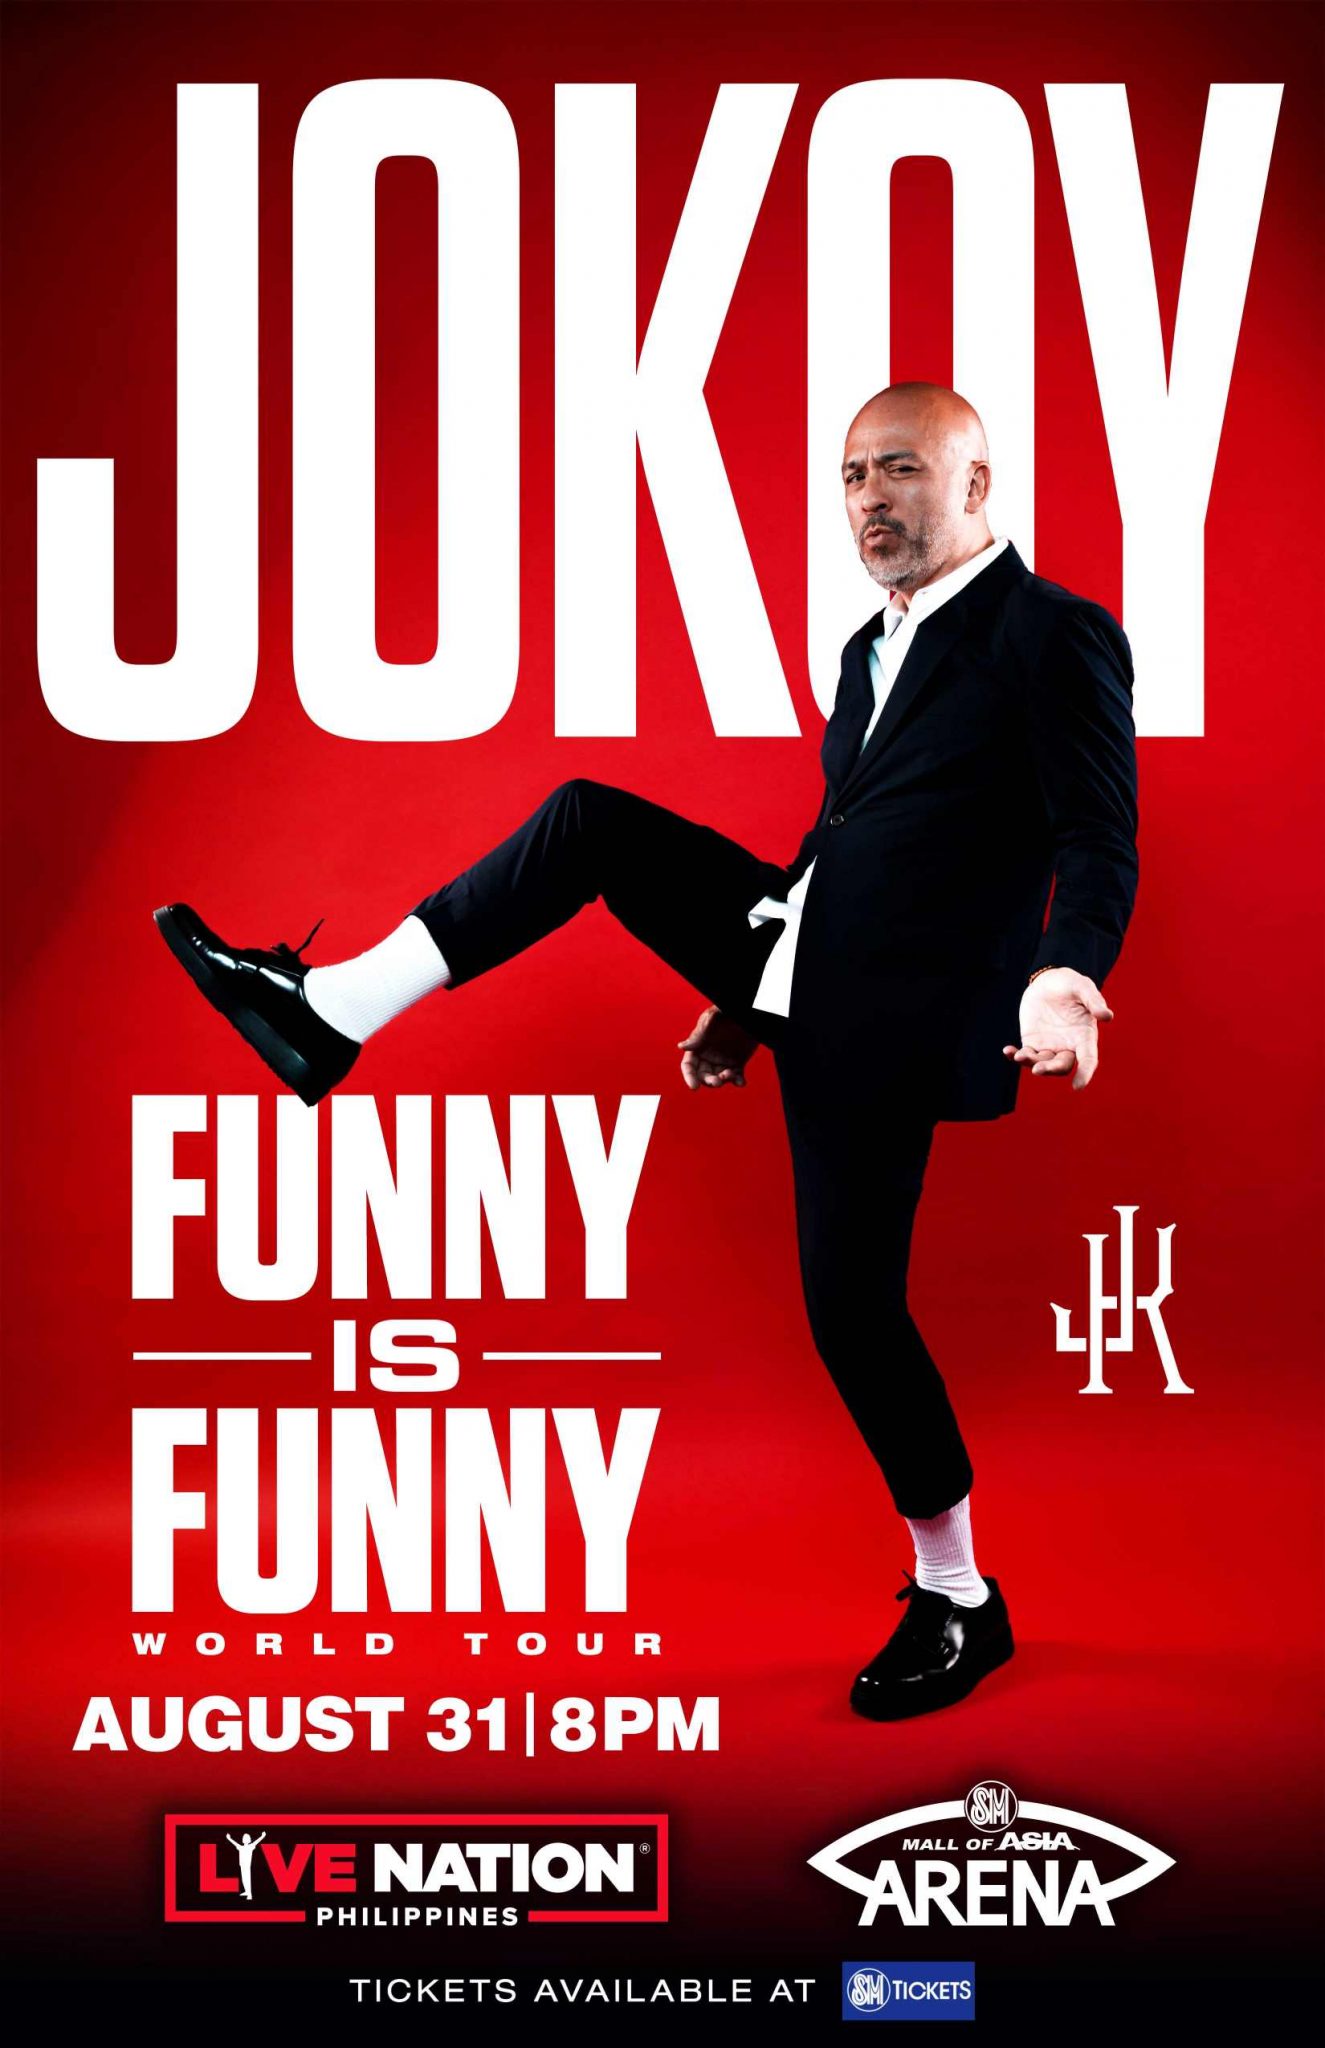 JOKOY FUNNY IS FUNNY WORLD TOUR Official website